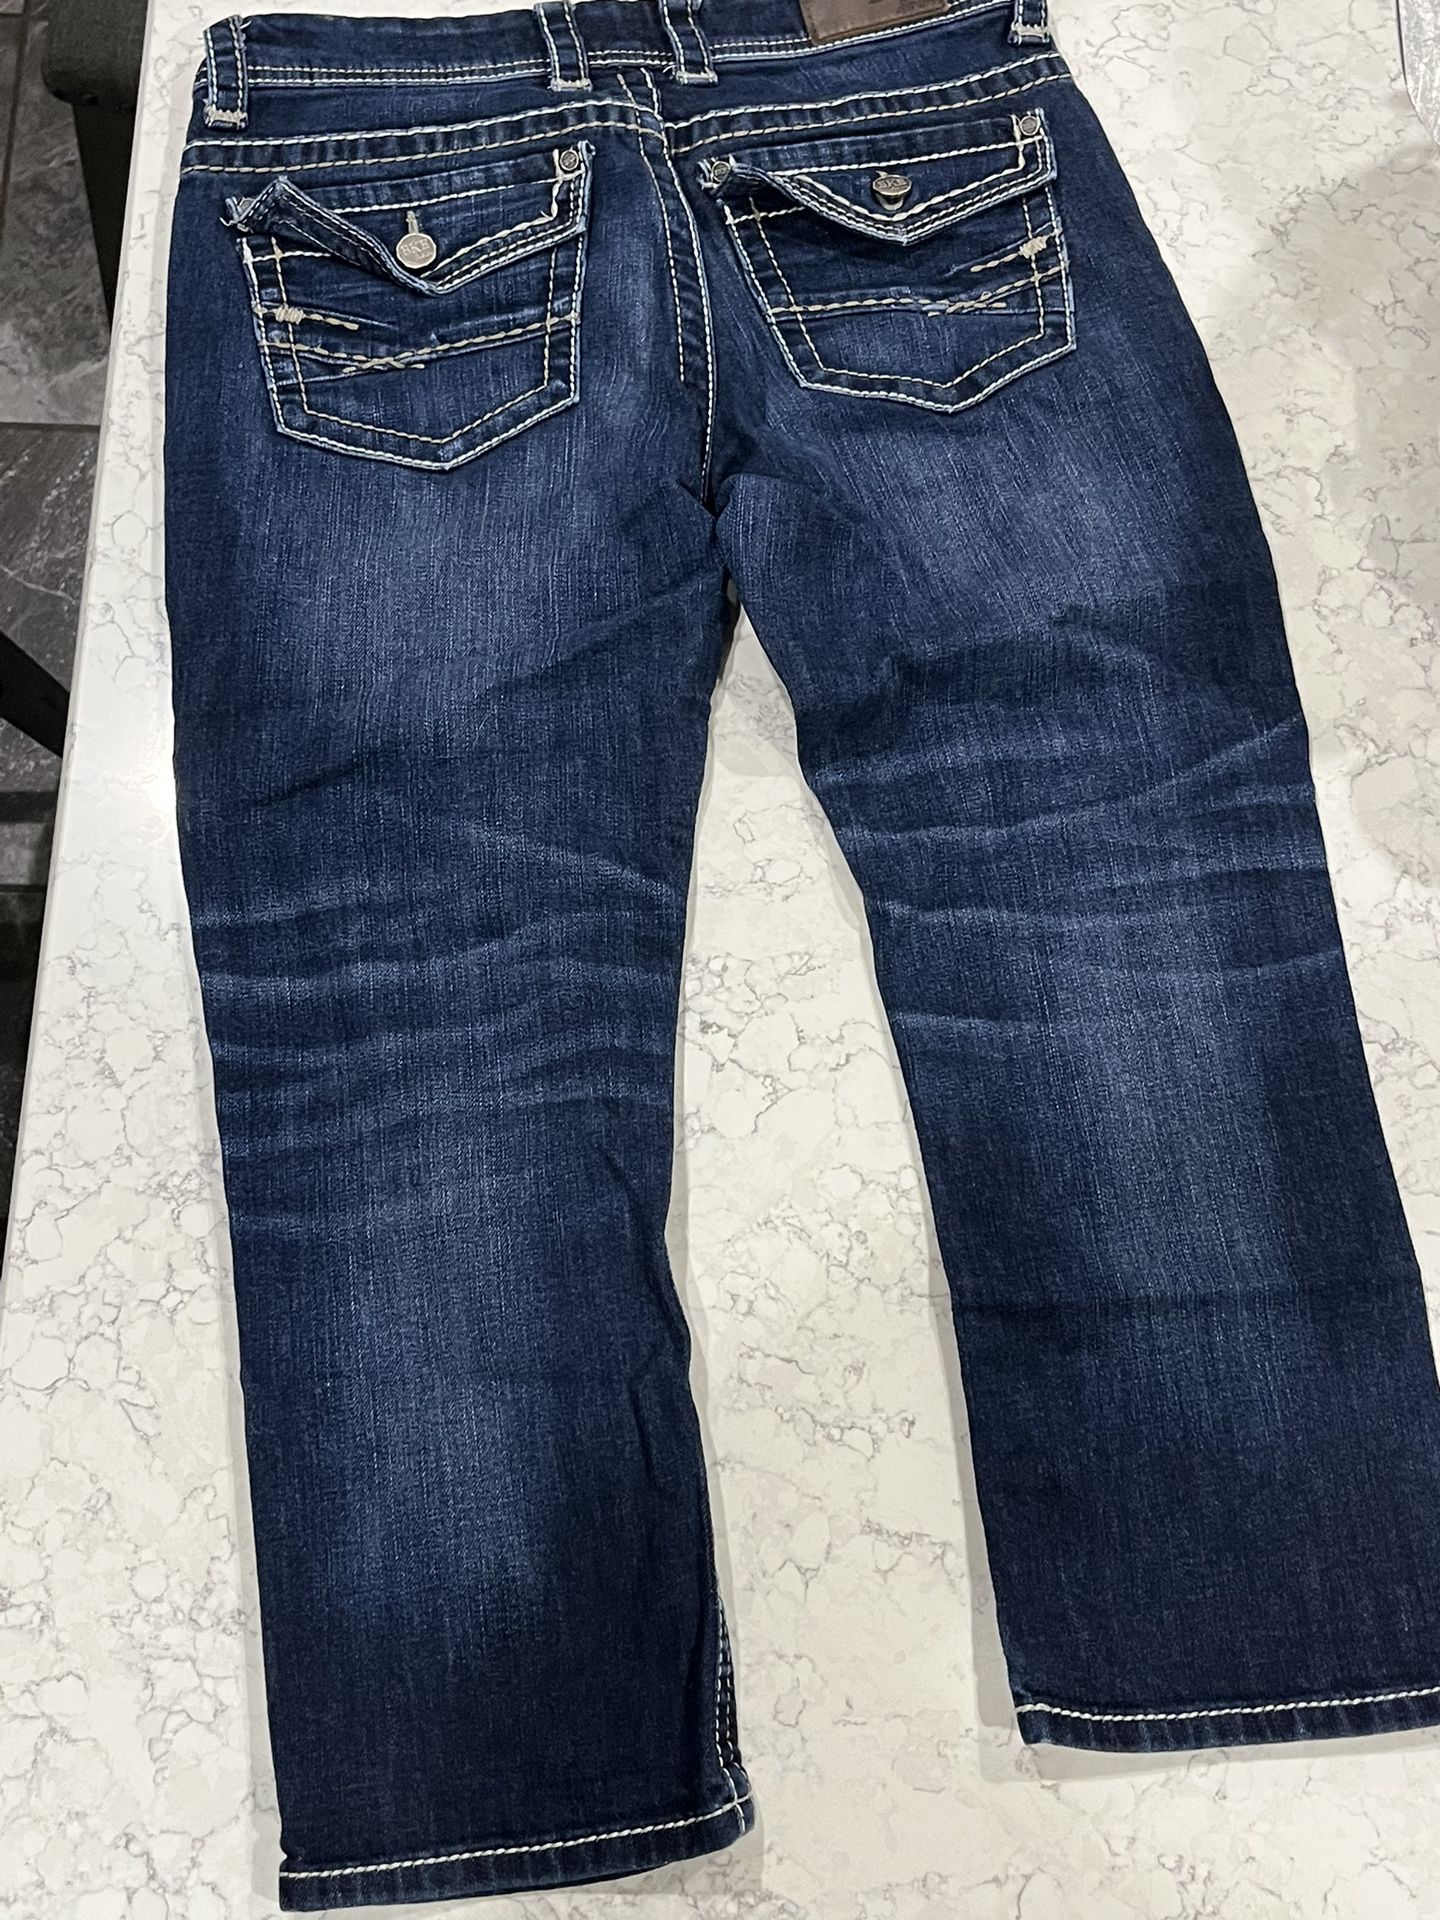 Gently Worn Women’s ROCK AND REVIAL JEANS 